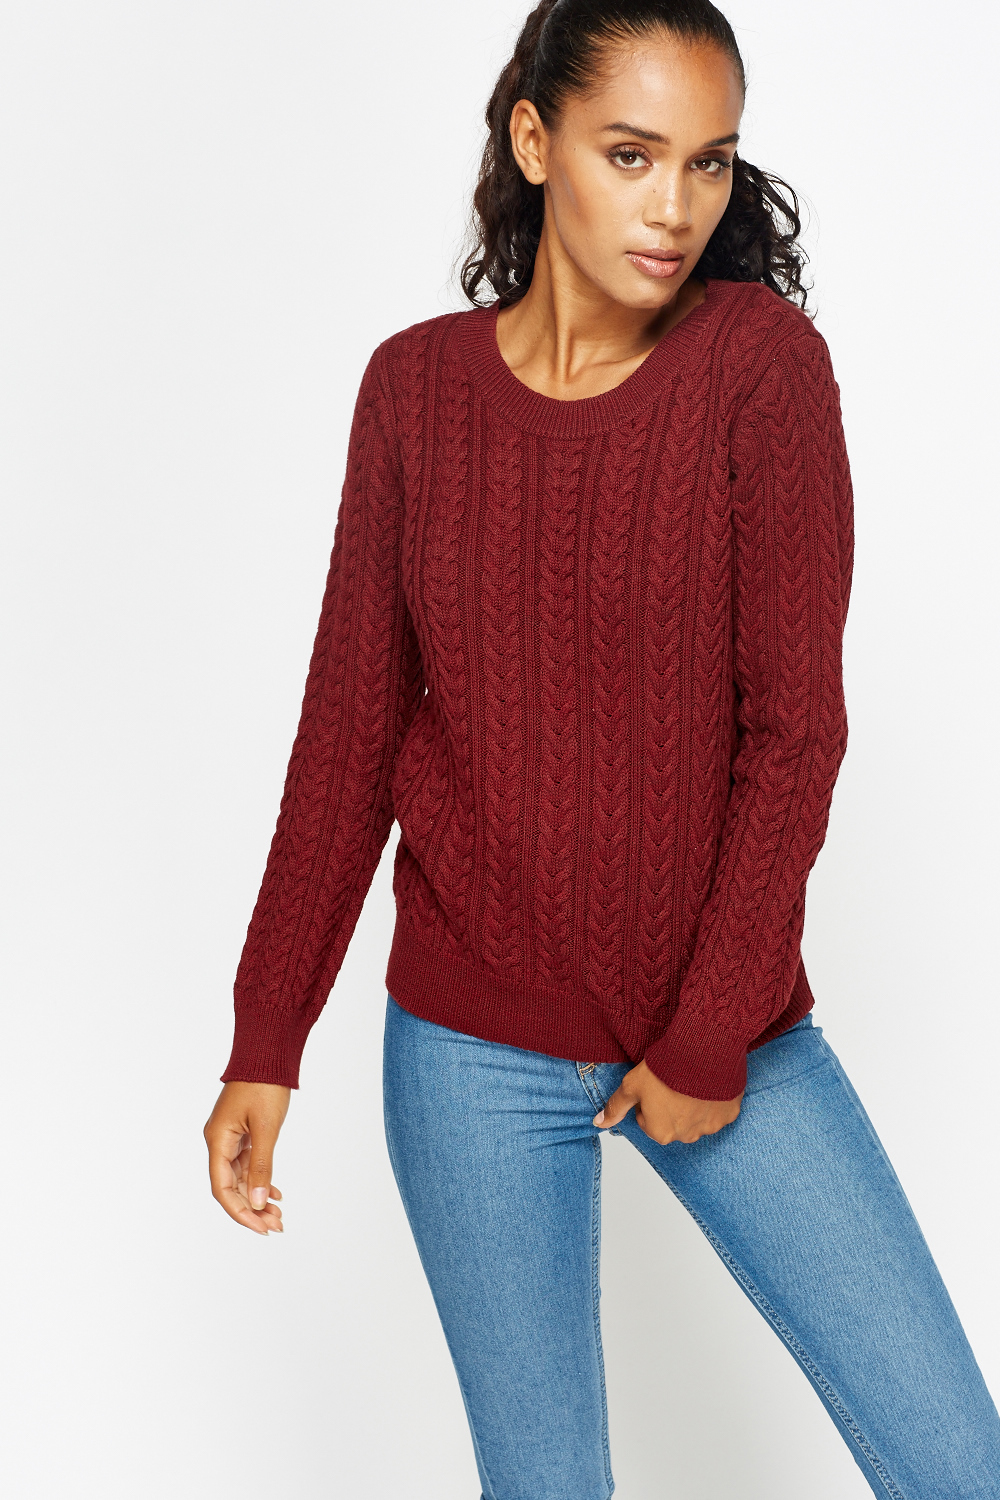 Knitted Casual Jumper - Just $7